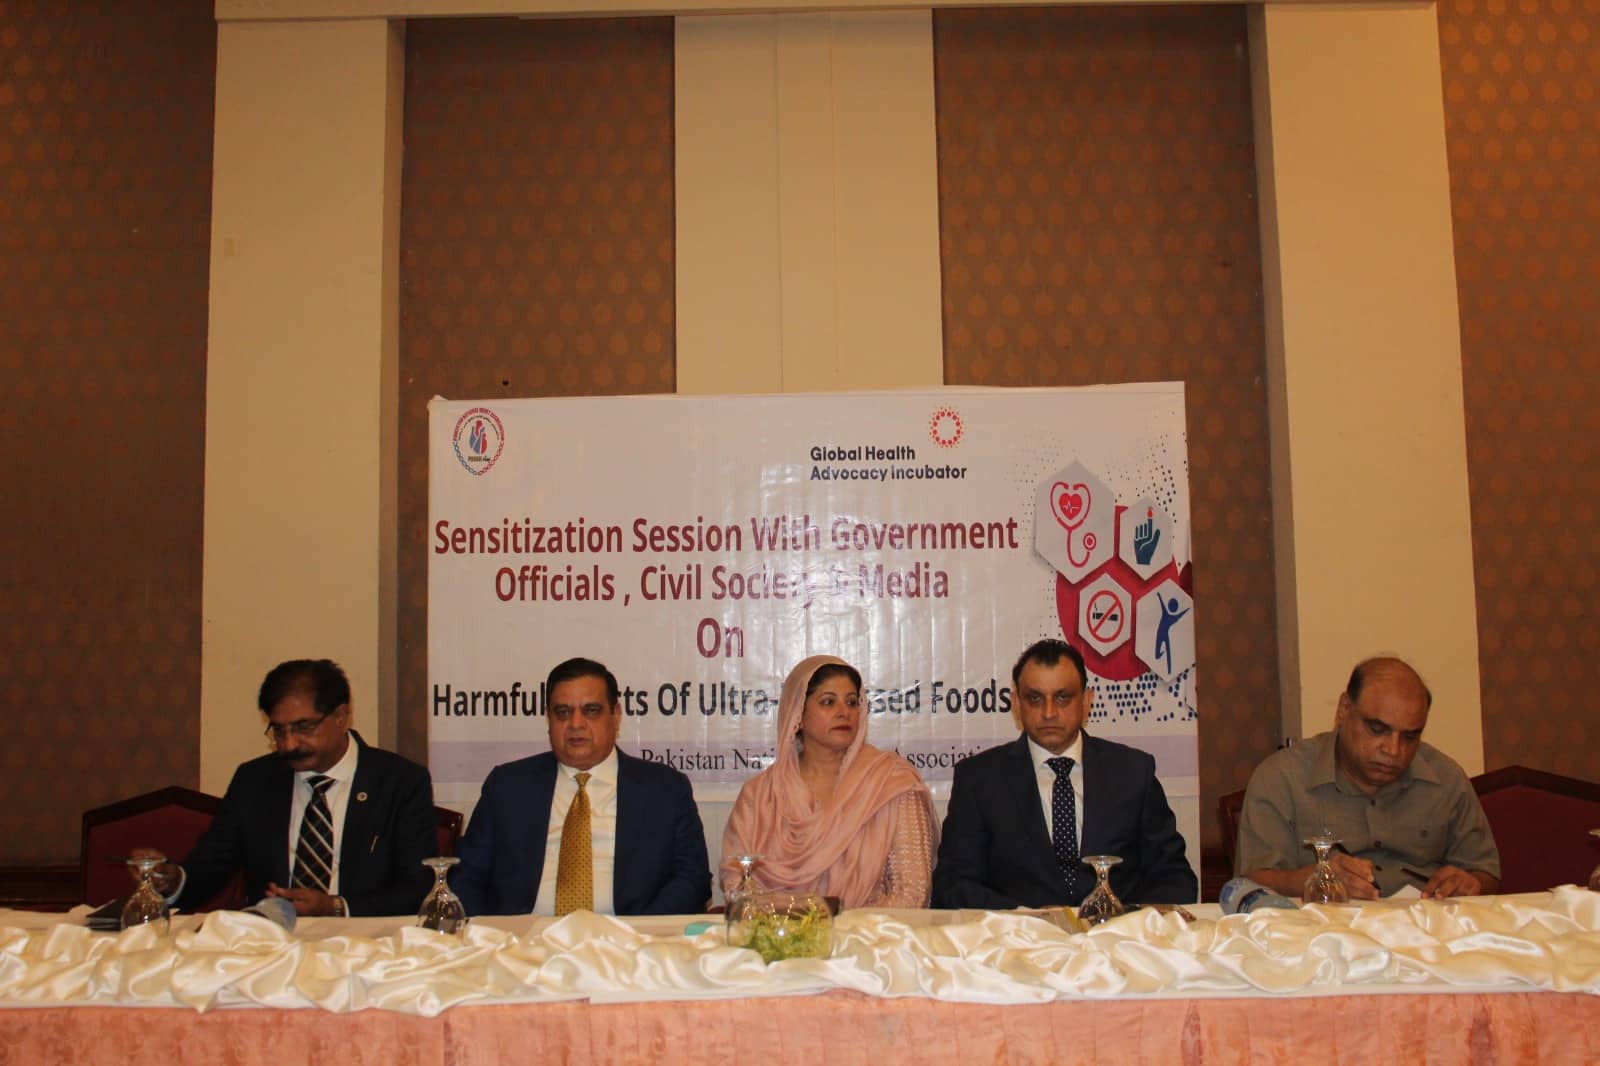 Sensitization Session with Govt Officials,Civil society & Media on harmful effects of ultra processed foods . Venue : PC Hotel Muzaffarabad